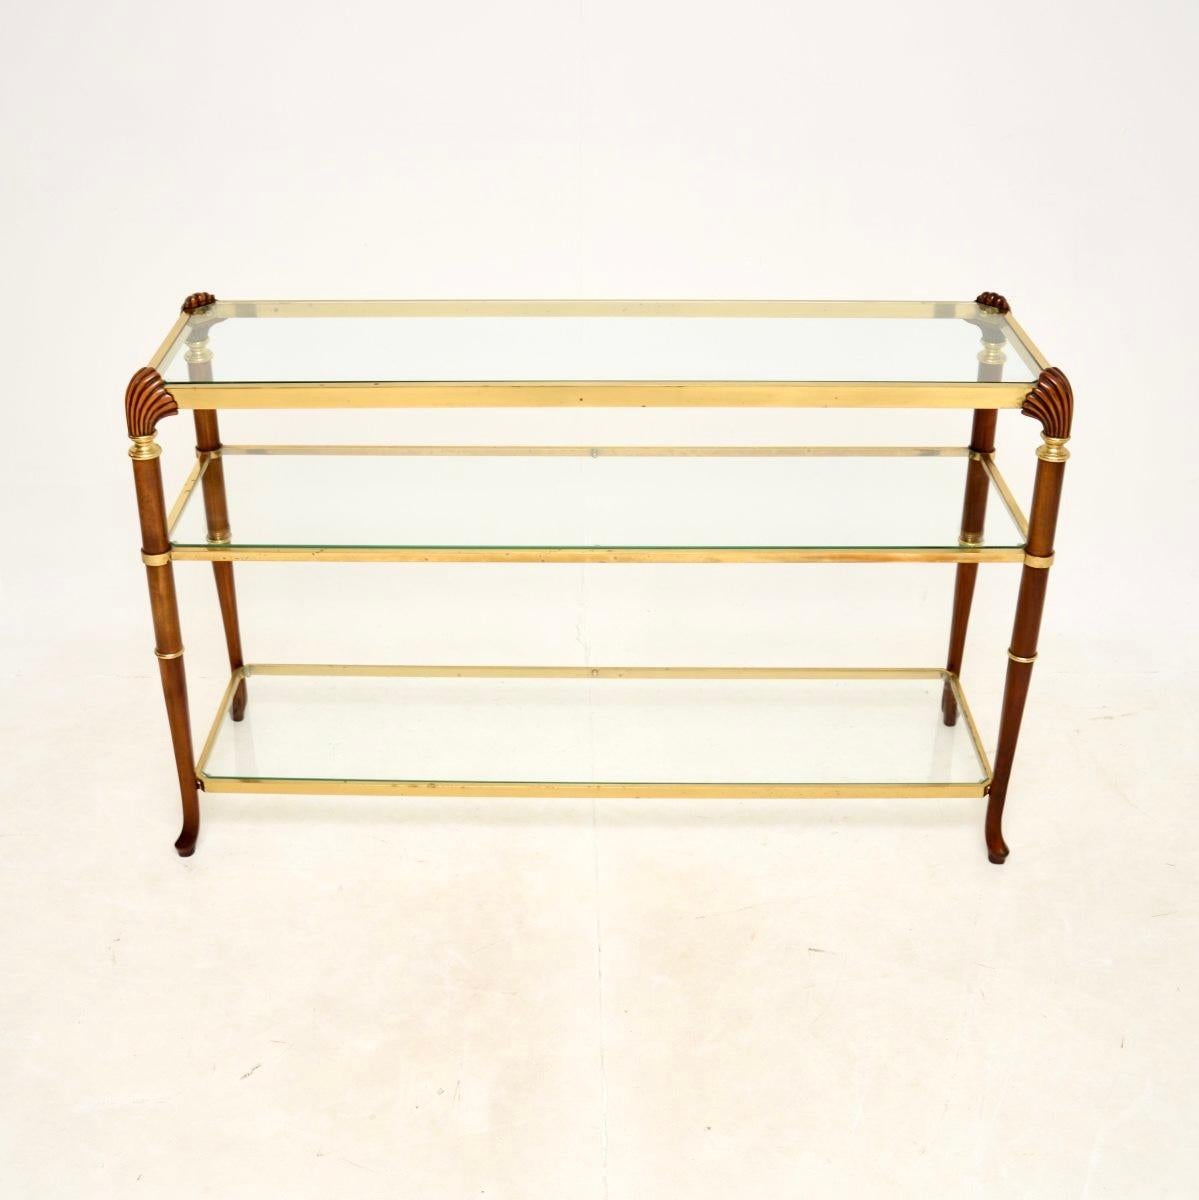 An absolutely stunning vintage French walnut and brass console table, dating from around the 1960-70’s.

It is of superb quality, the solid walnut legs have gorgeous shell carving at the top corners. The brass finished frame supports three inset